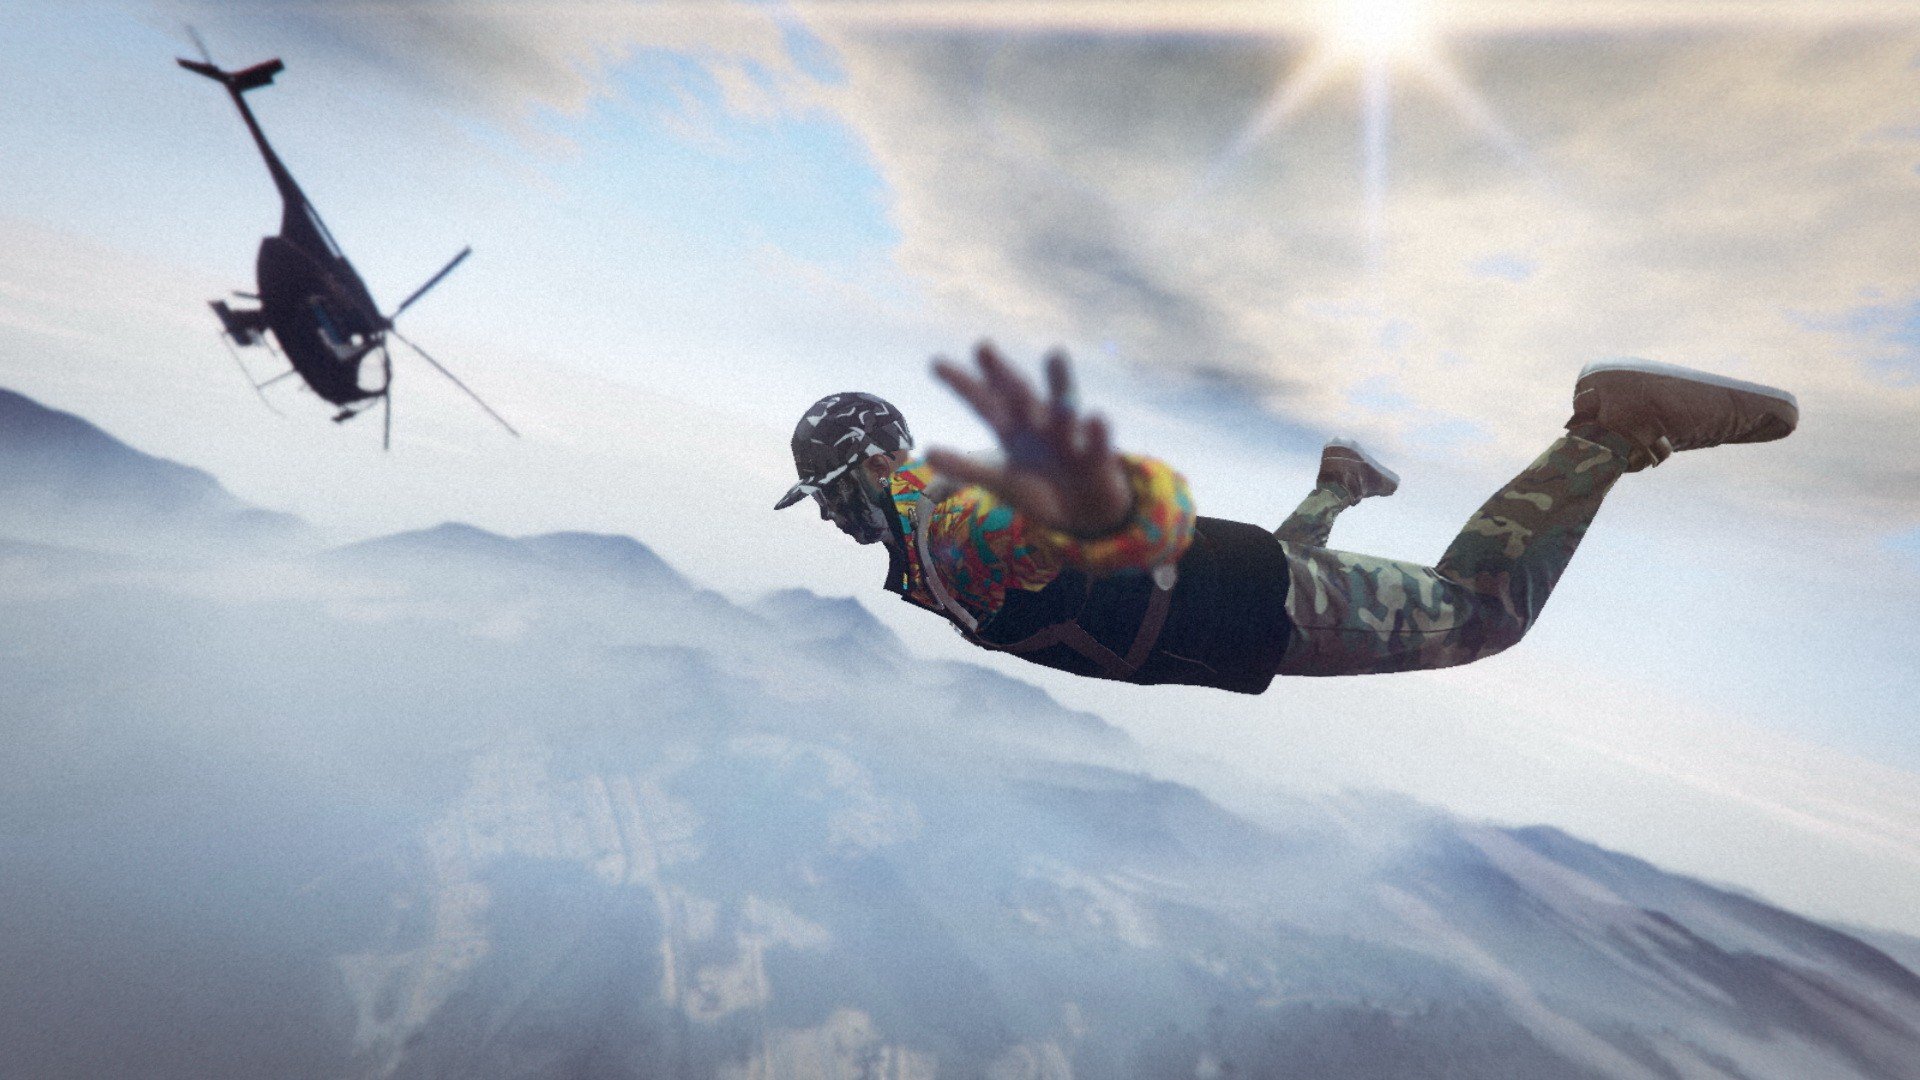 Grand Theft Auto V, Grand Theft Auto Online, Rockstar Games, Parachutes, Helicopters, Freefall, Mountains Wallpaper